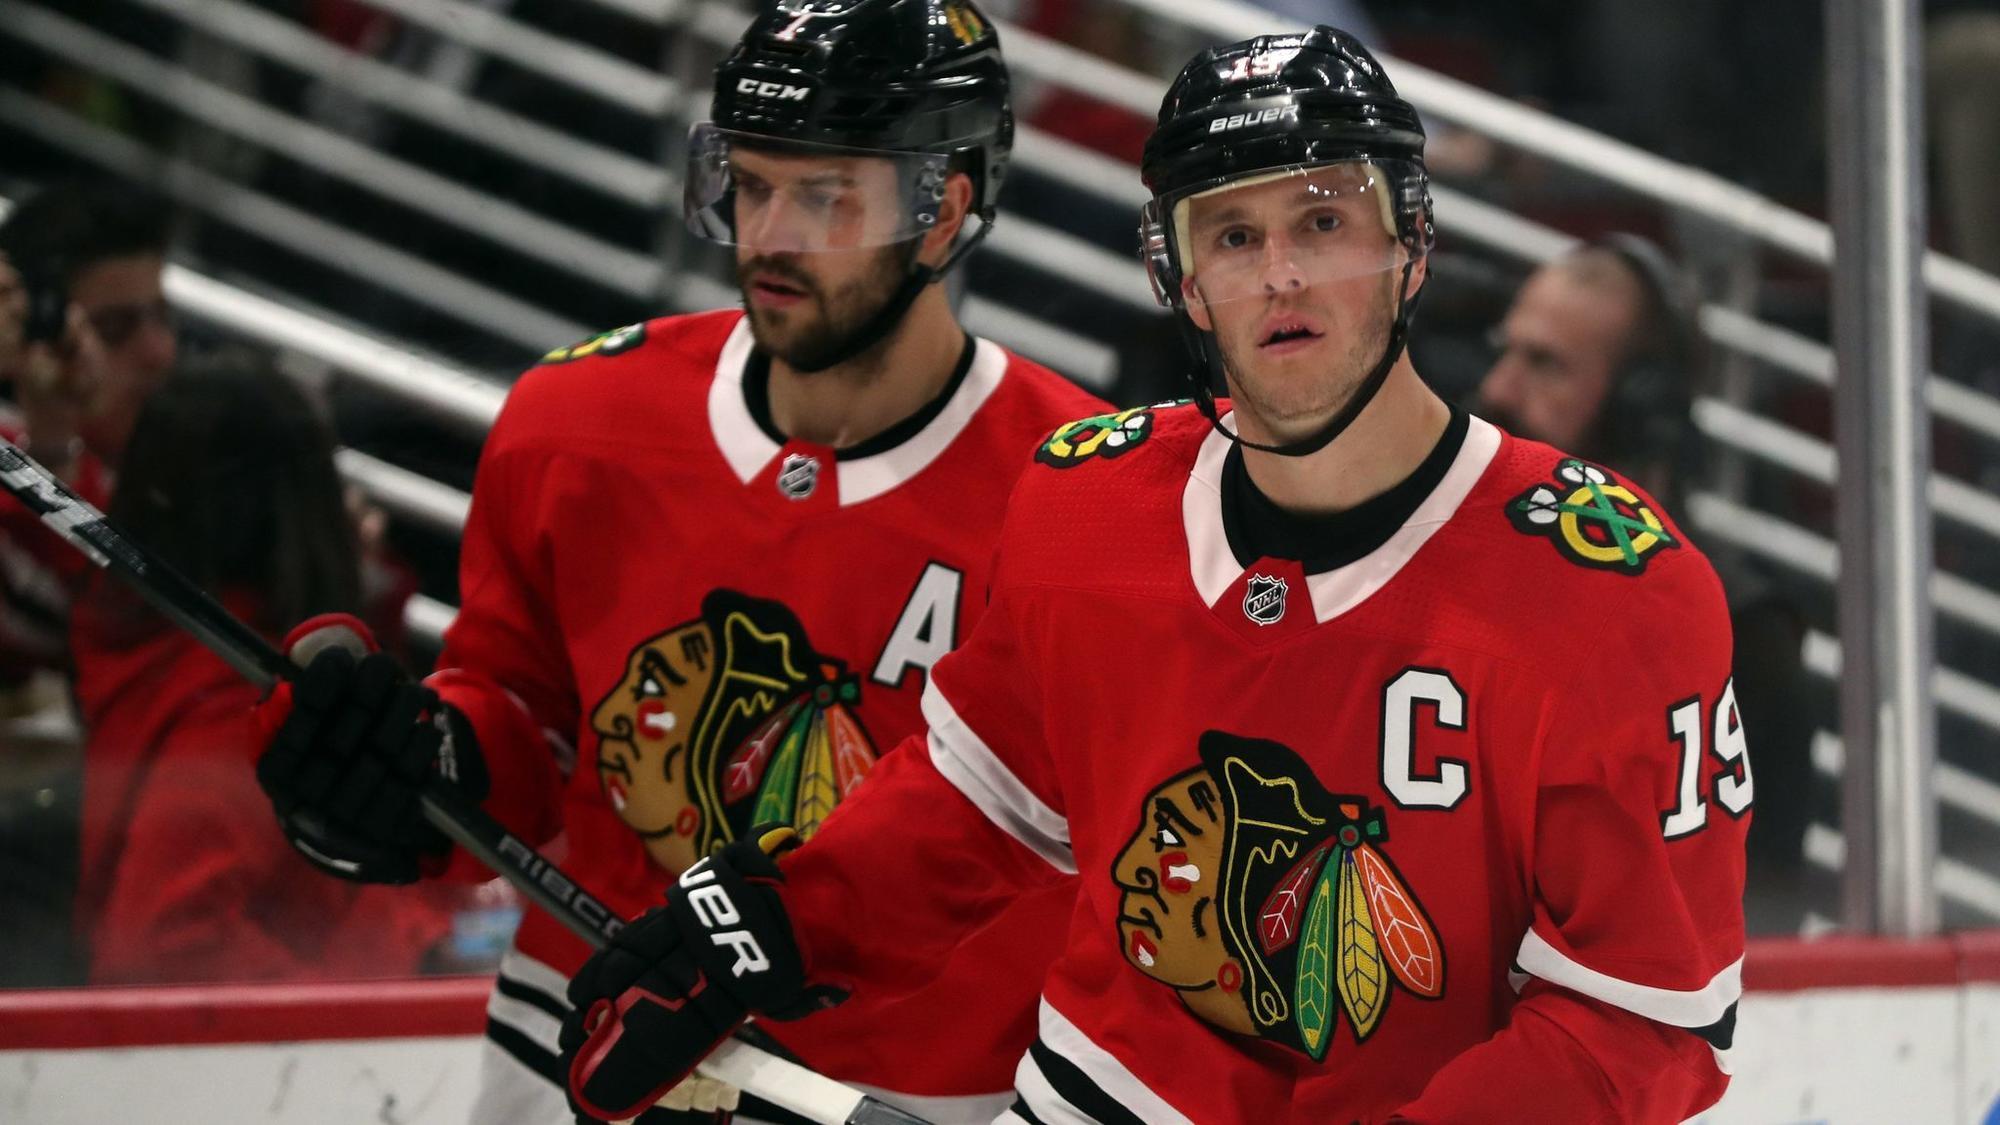 Lineup shakeup no help as Blackhawks get shut out for 3rd straight loss